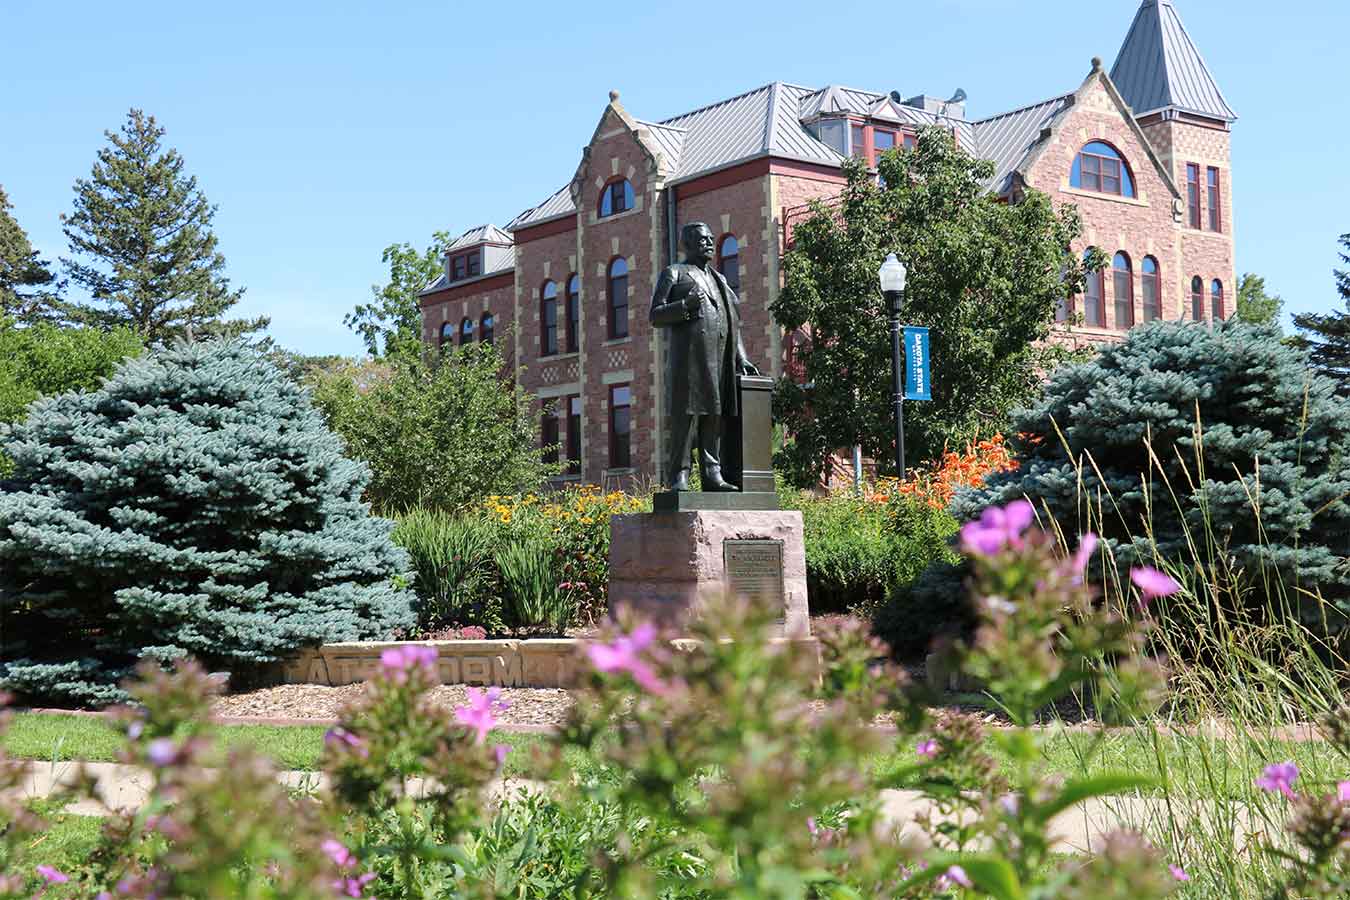 Summer campus photo featuring flowers, a statue of General Beadle, and Beadle Hall